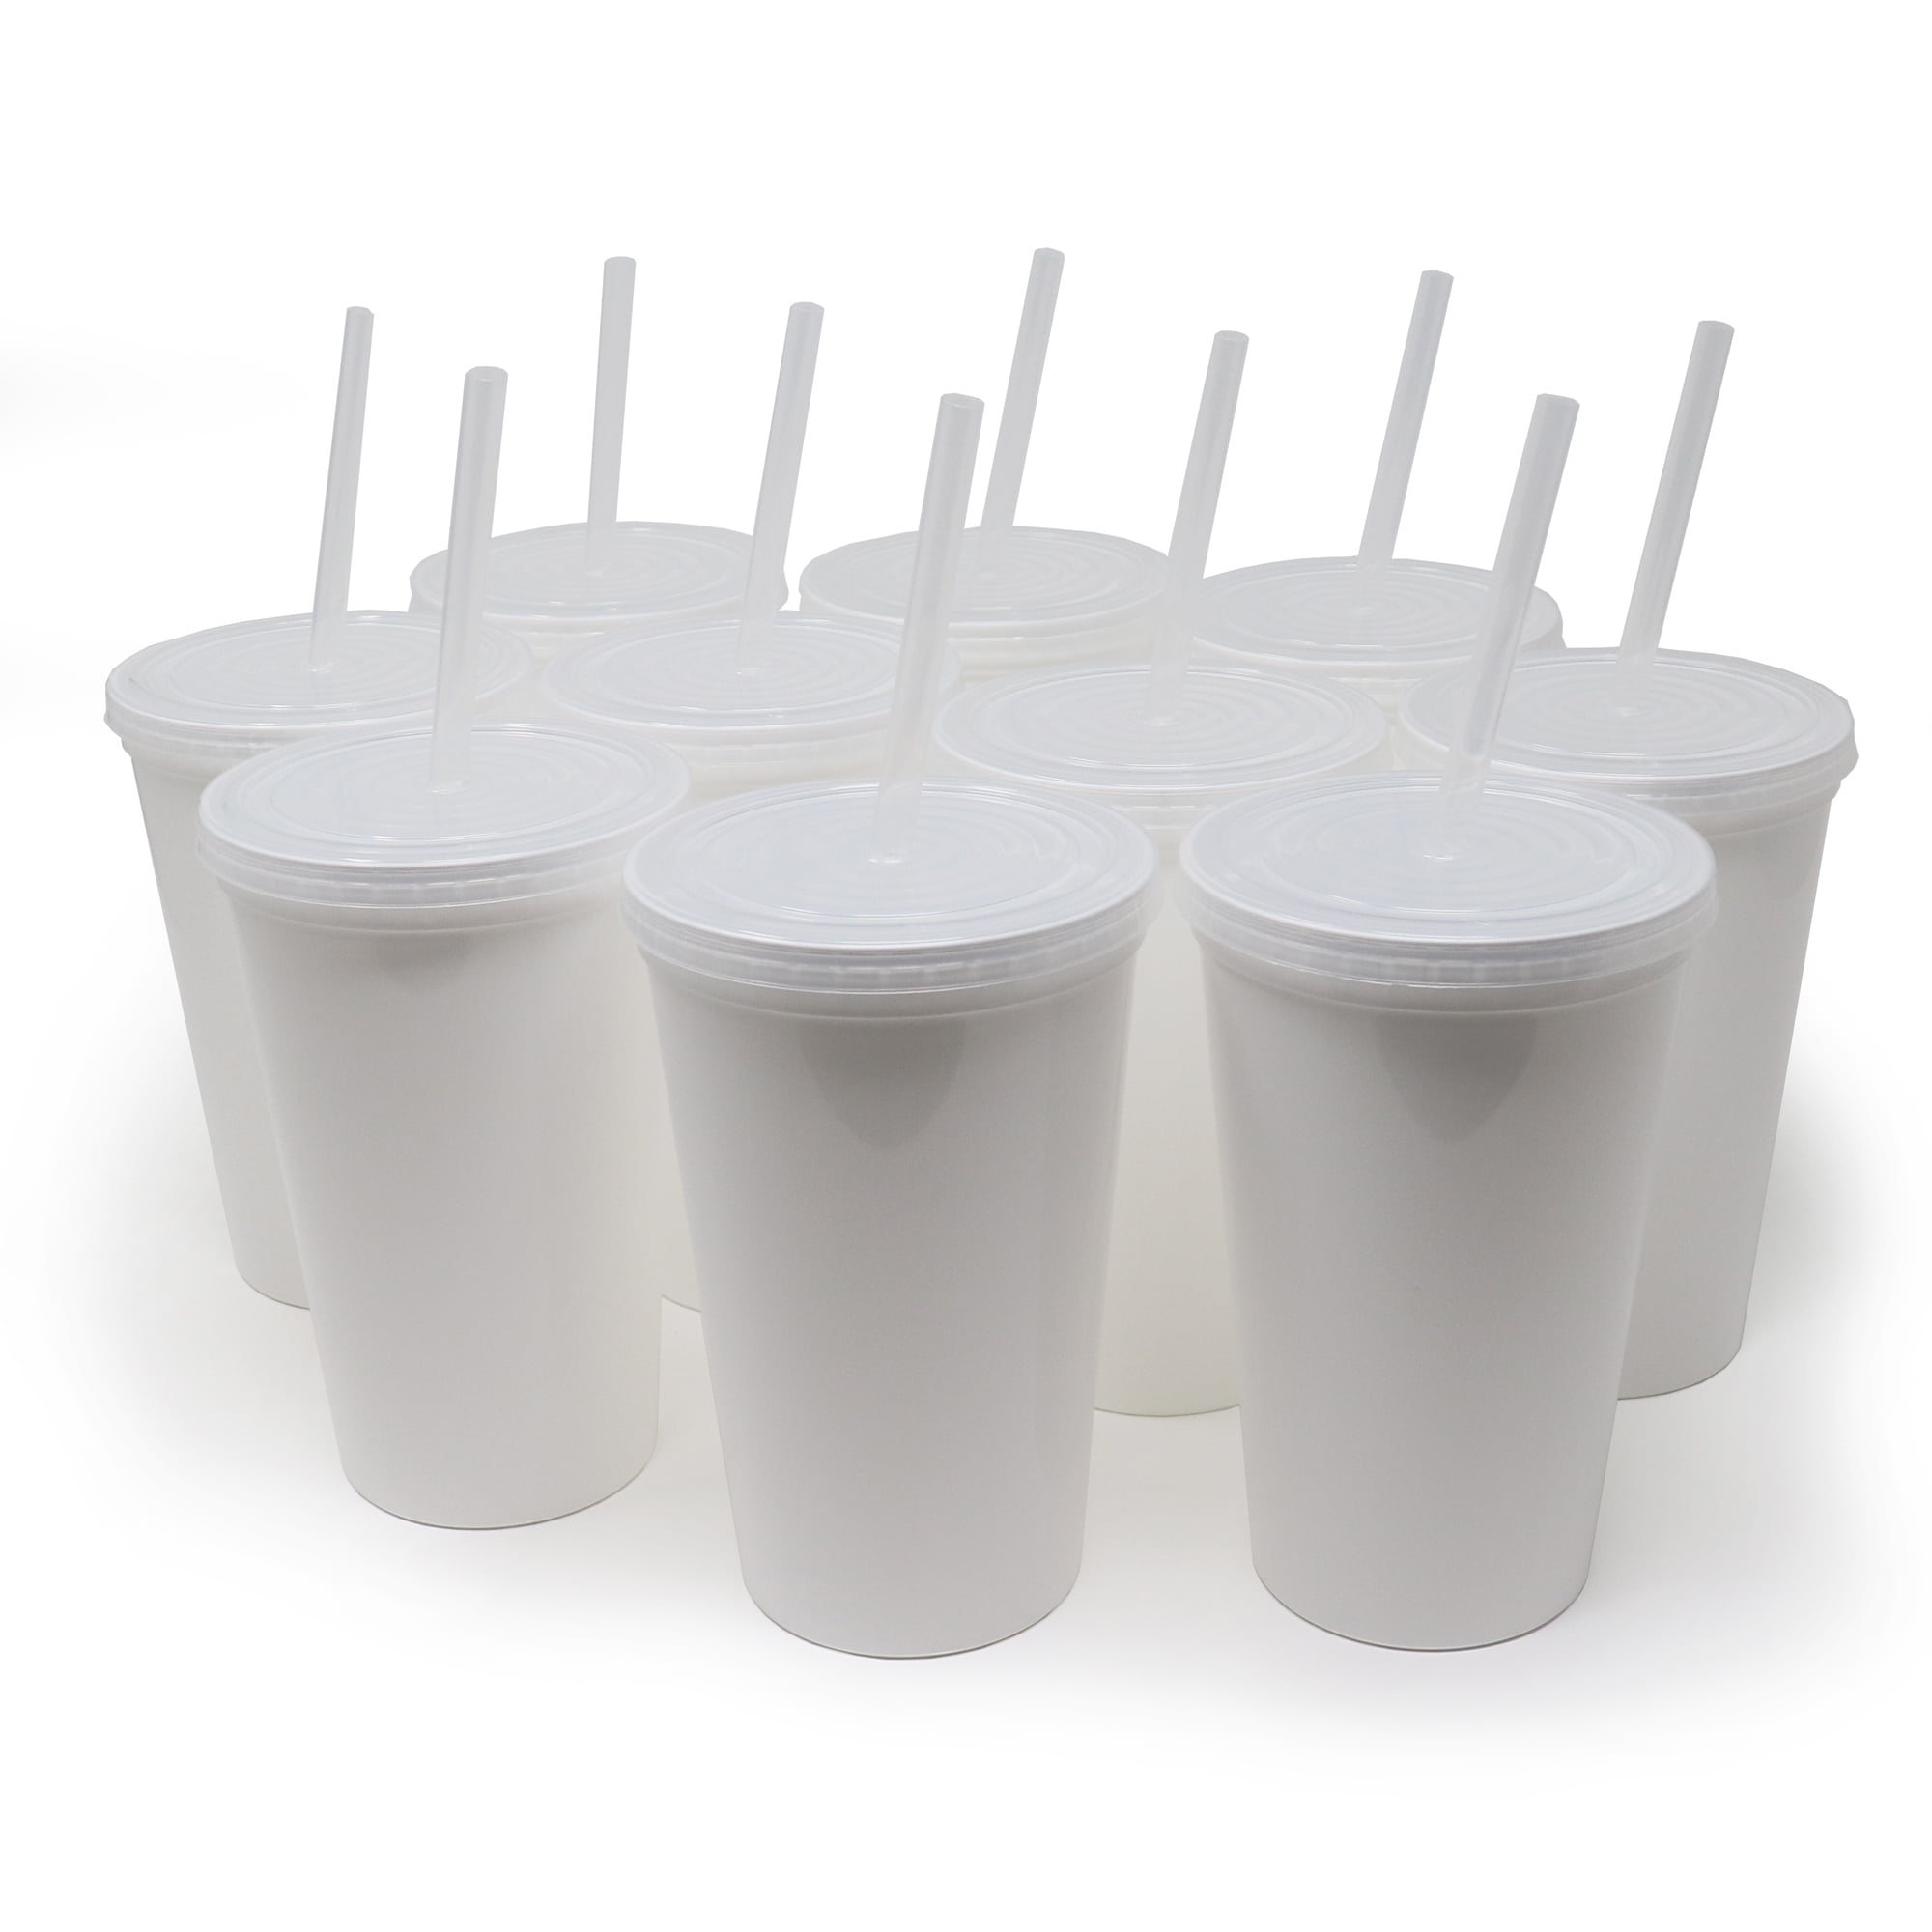 HotSips Reusable Drinking Straws Ergonomic Shape Made in USA for All Tumblers & Cups 12-40 oz Use in Cold or Hot Beverages, Coffee and Tea, Portable